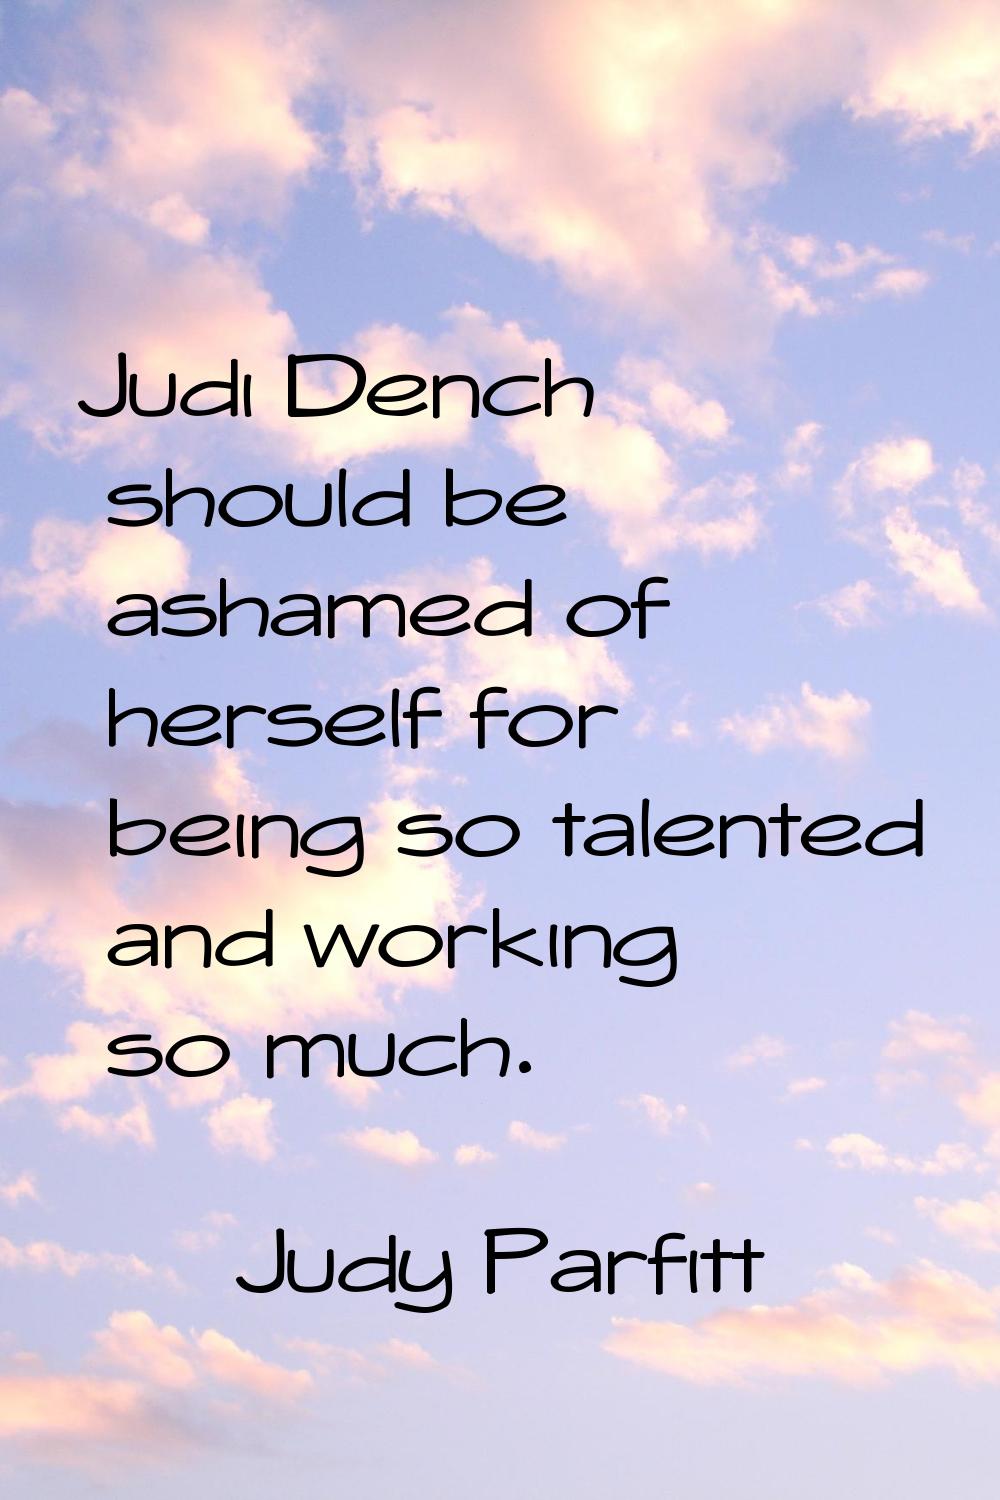 Judi Dench should be ashamed of herself for being so talented and working so much.